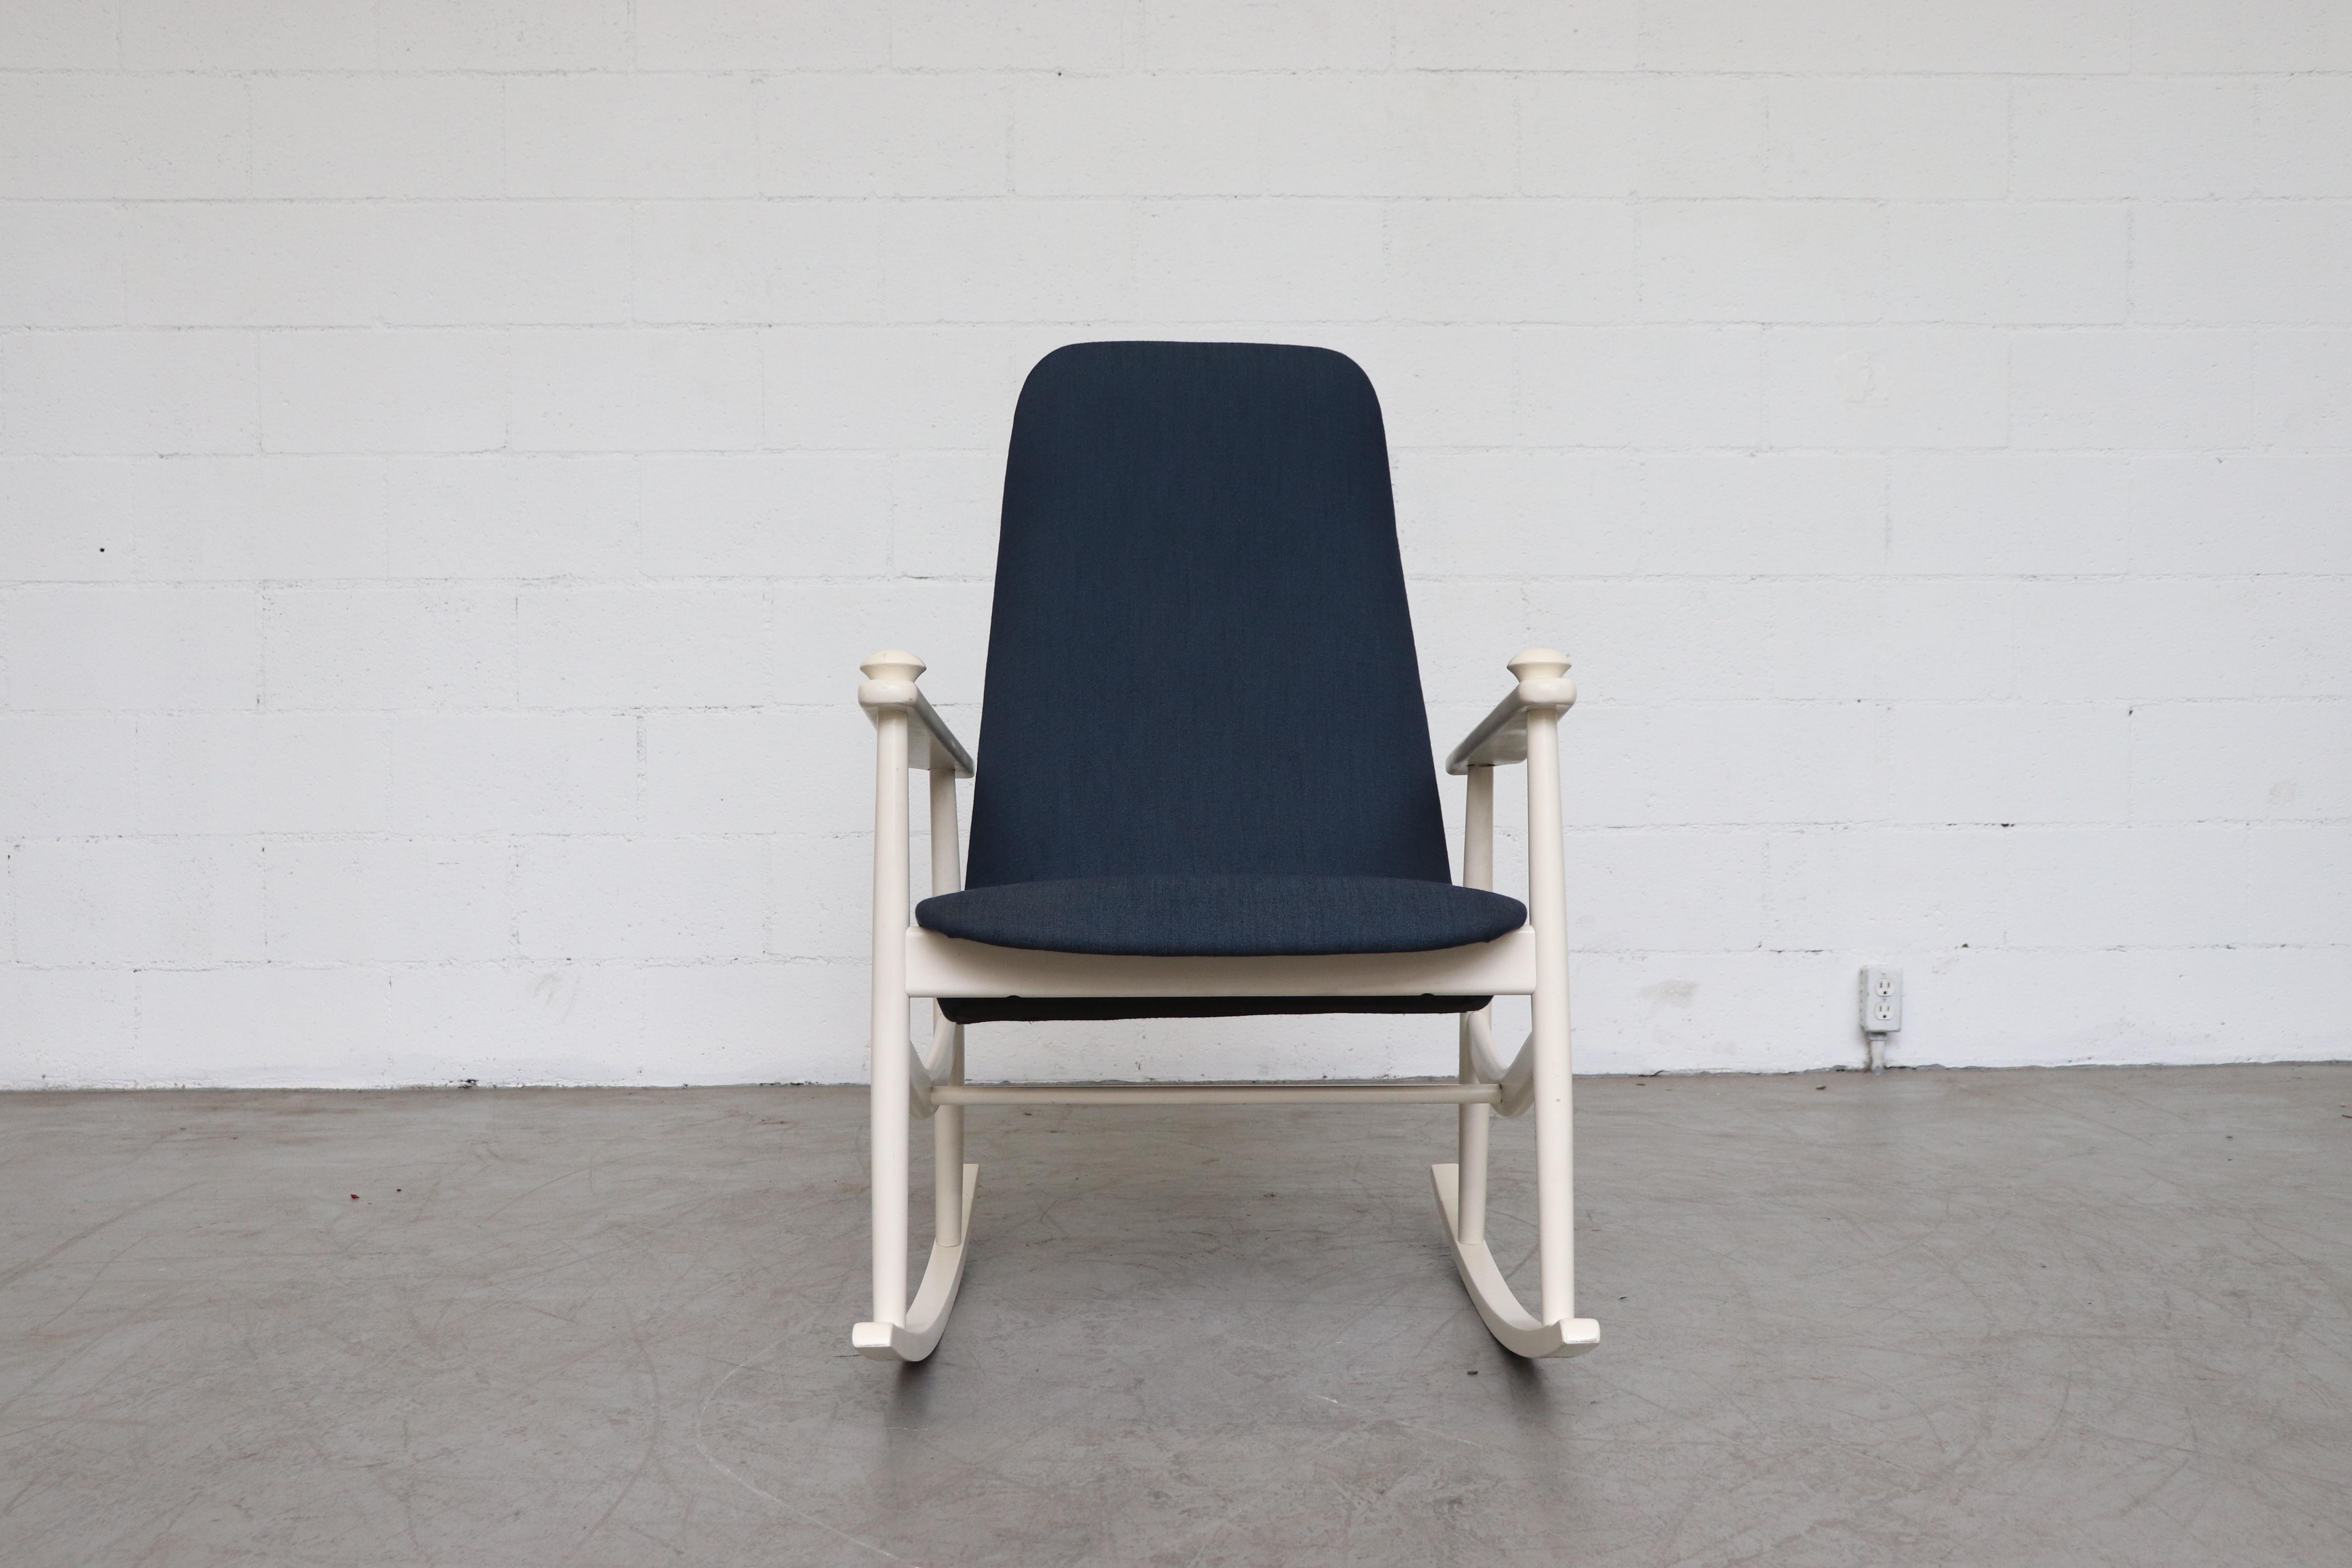 Navy blue high back rocking chair. Newly upholstered. White painted wood frame. In good original condition with some signs of visual wear consistent with age and use. Details in photos.